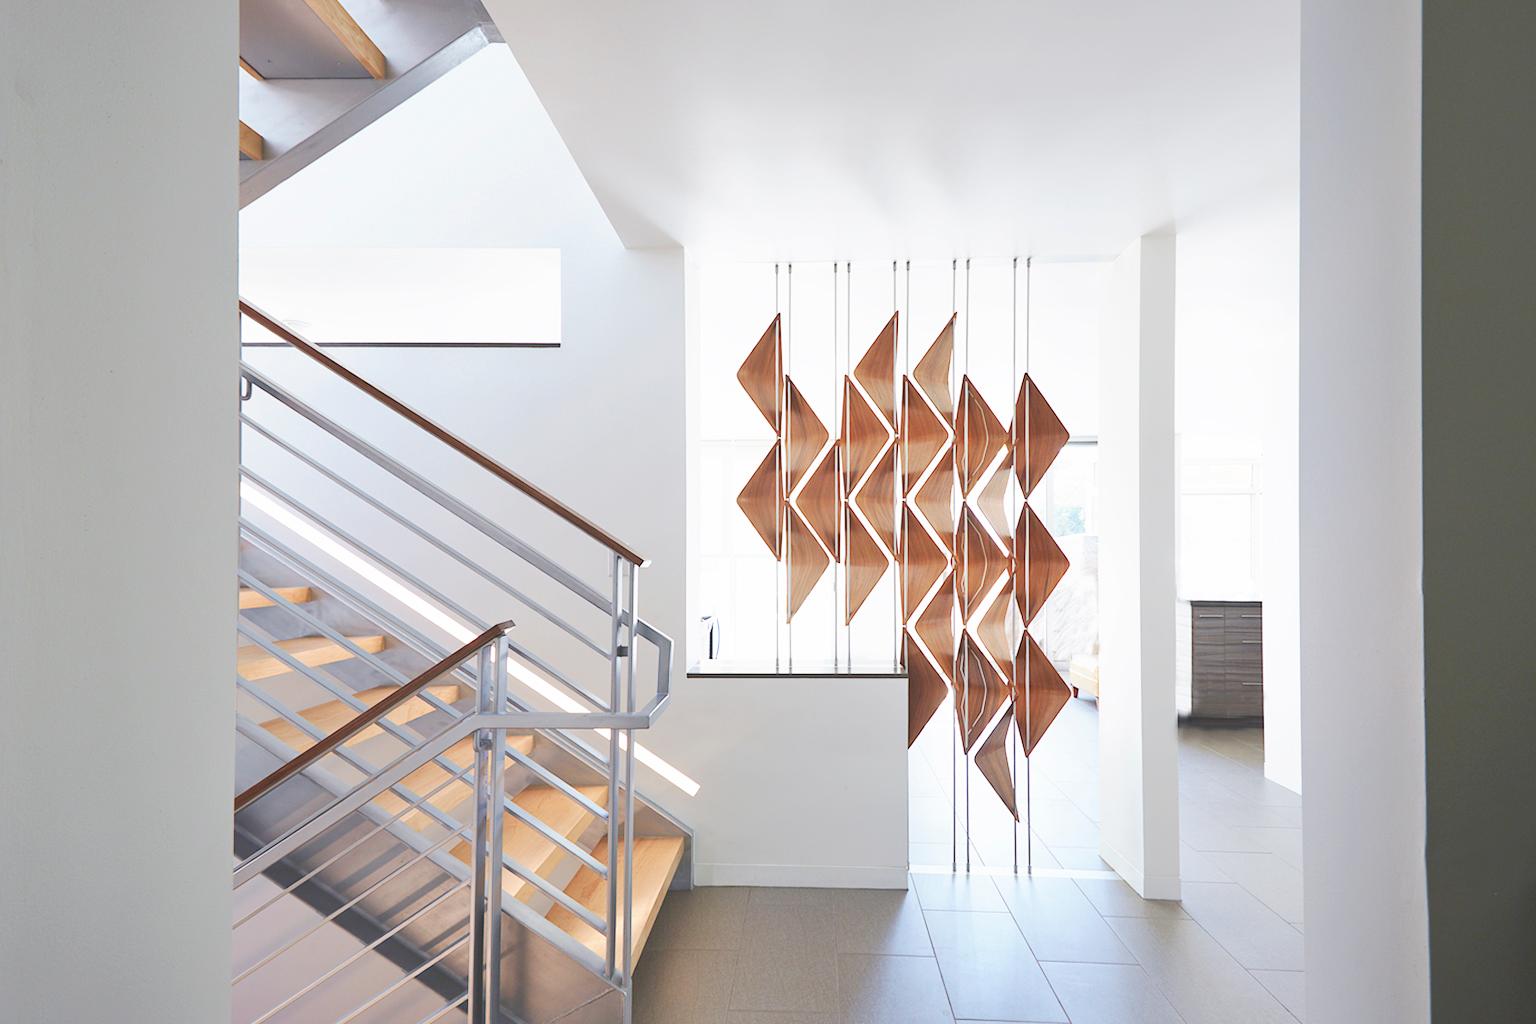 Contemporary 14 Bar Window Shades: Modern Walnut and Aluminum, Room Divider or Screen For Sale